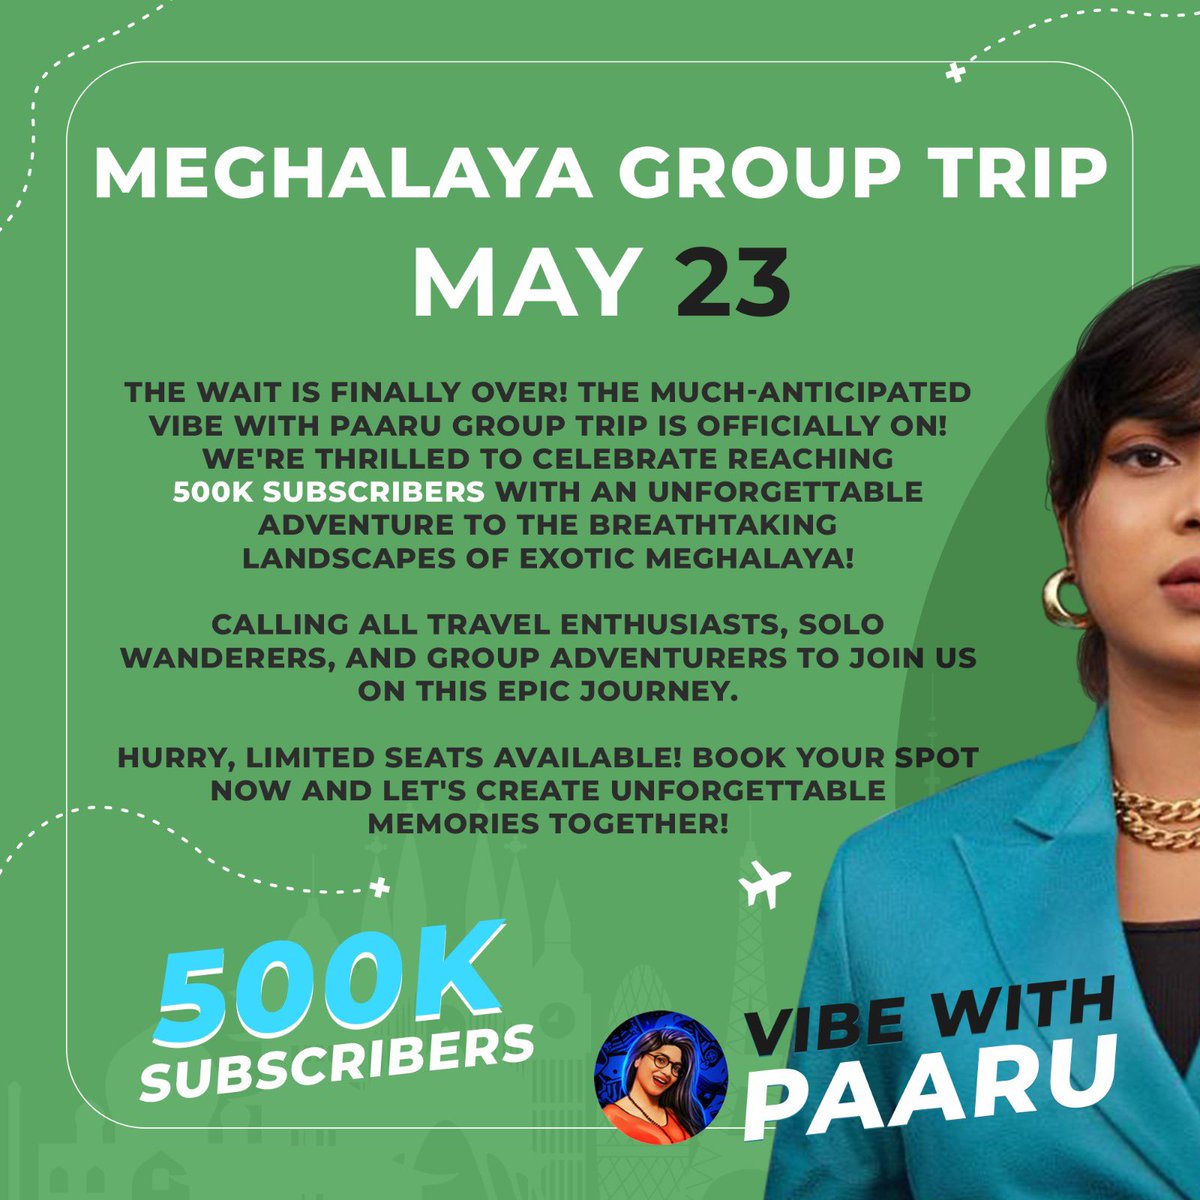 Closing Bookings on or before May 8. Filling Fast. Limited seats only. Block Yours now 🧿❤️🤌 #VibeWithPaaru #Meghalaya #GroupTrip